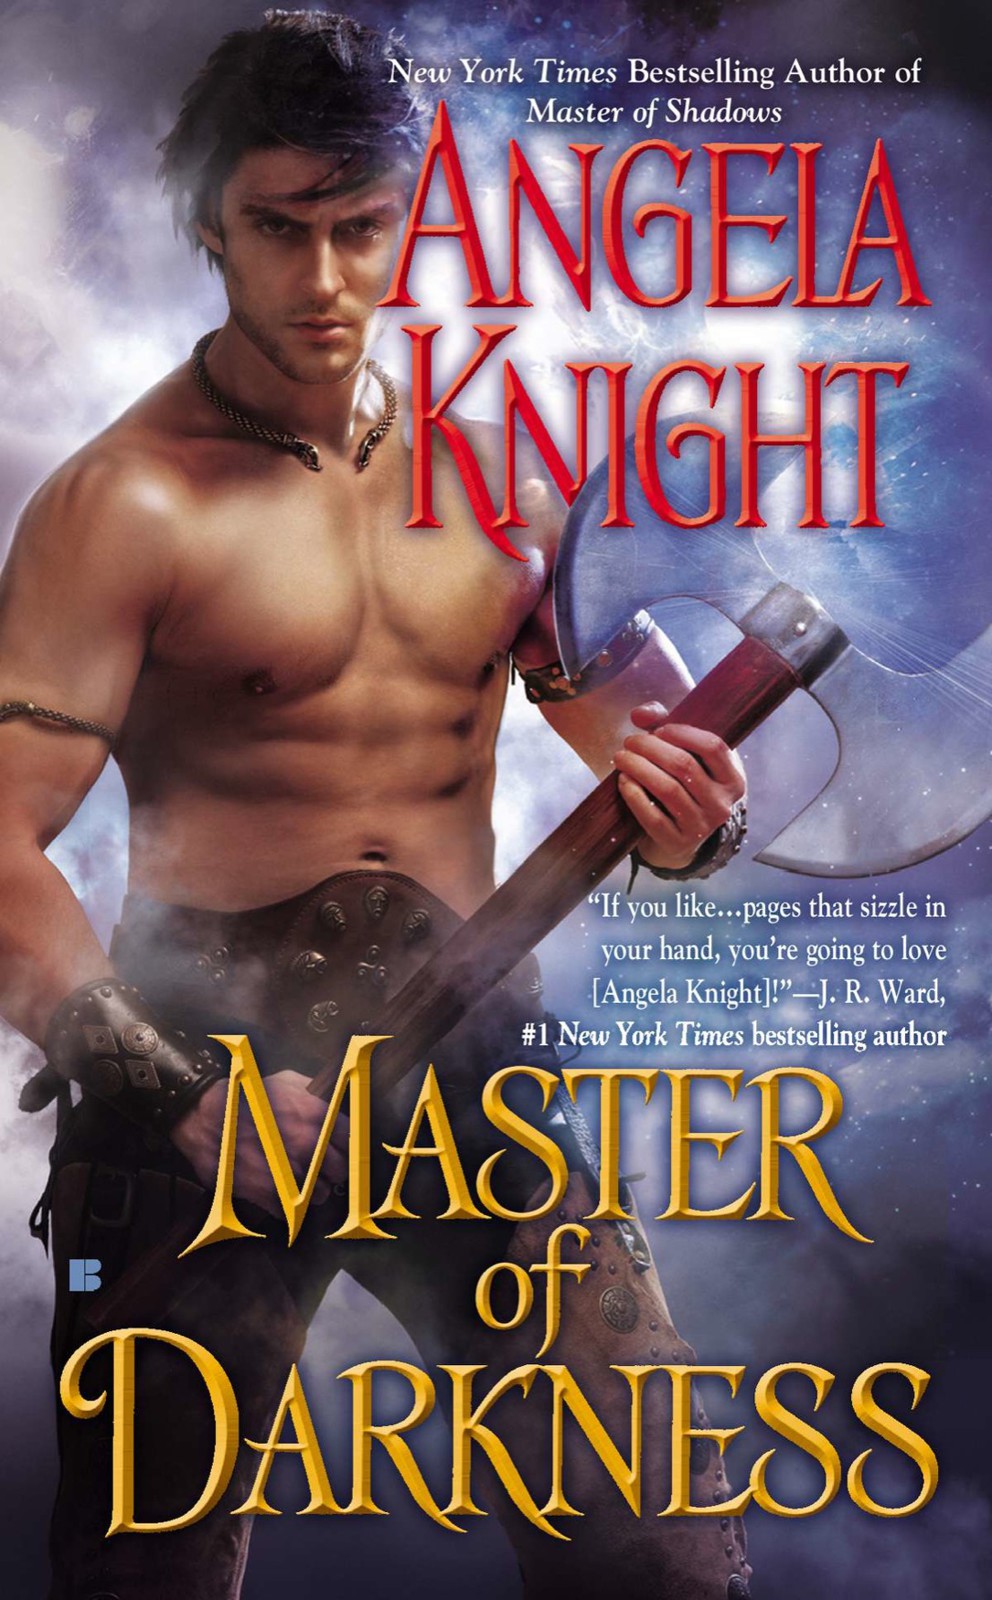 Master of Darkness by Angela Knight